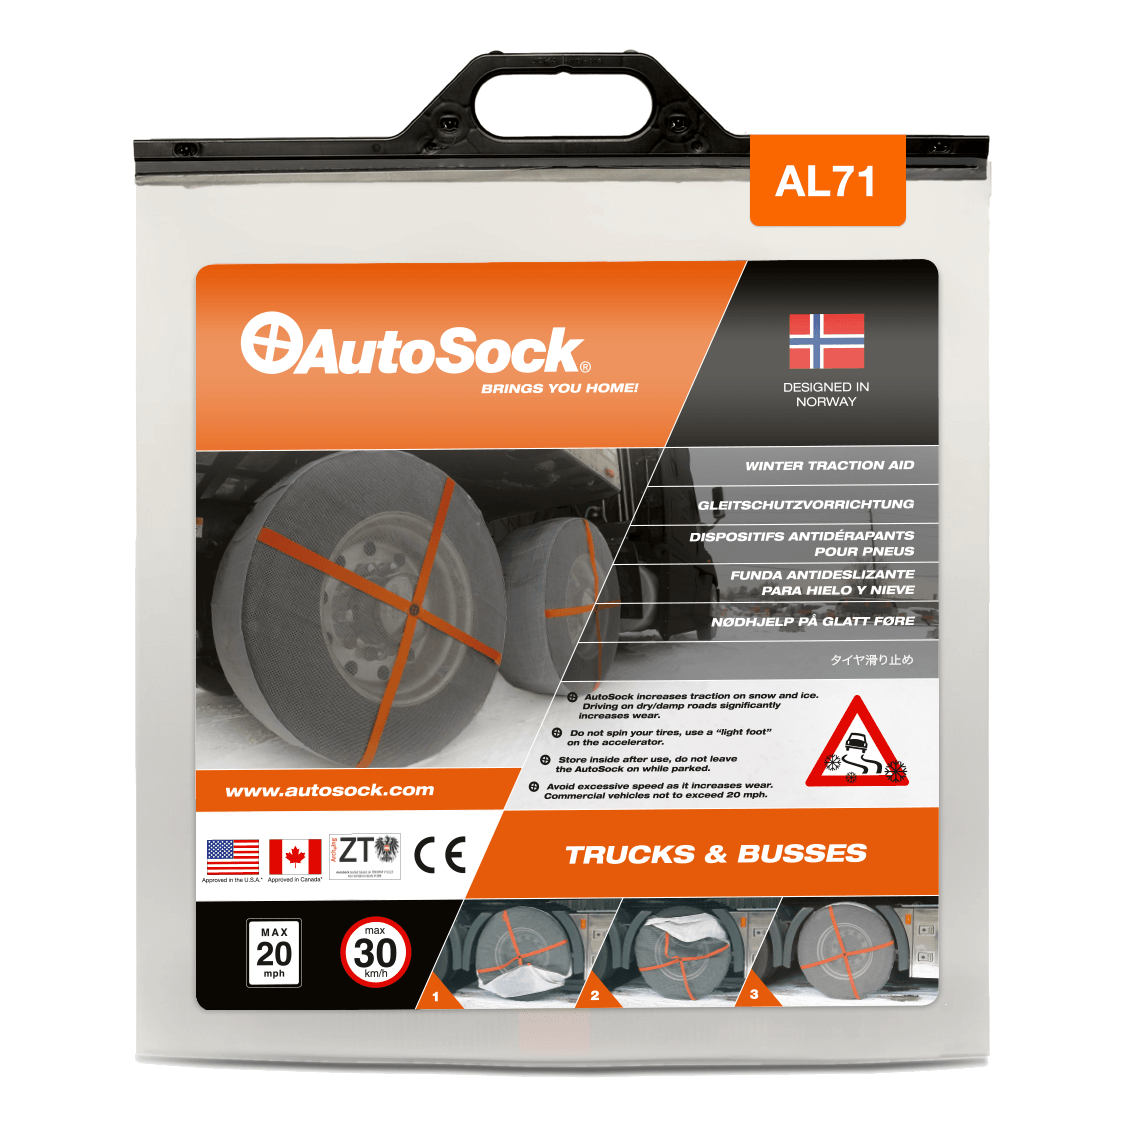 Product Packaging of AutoSock AL 71 AL71 for trucks (front view)